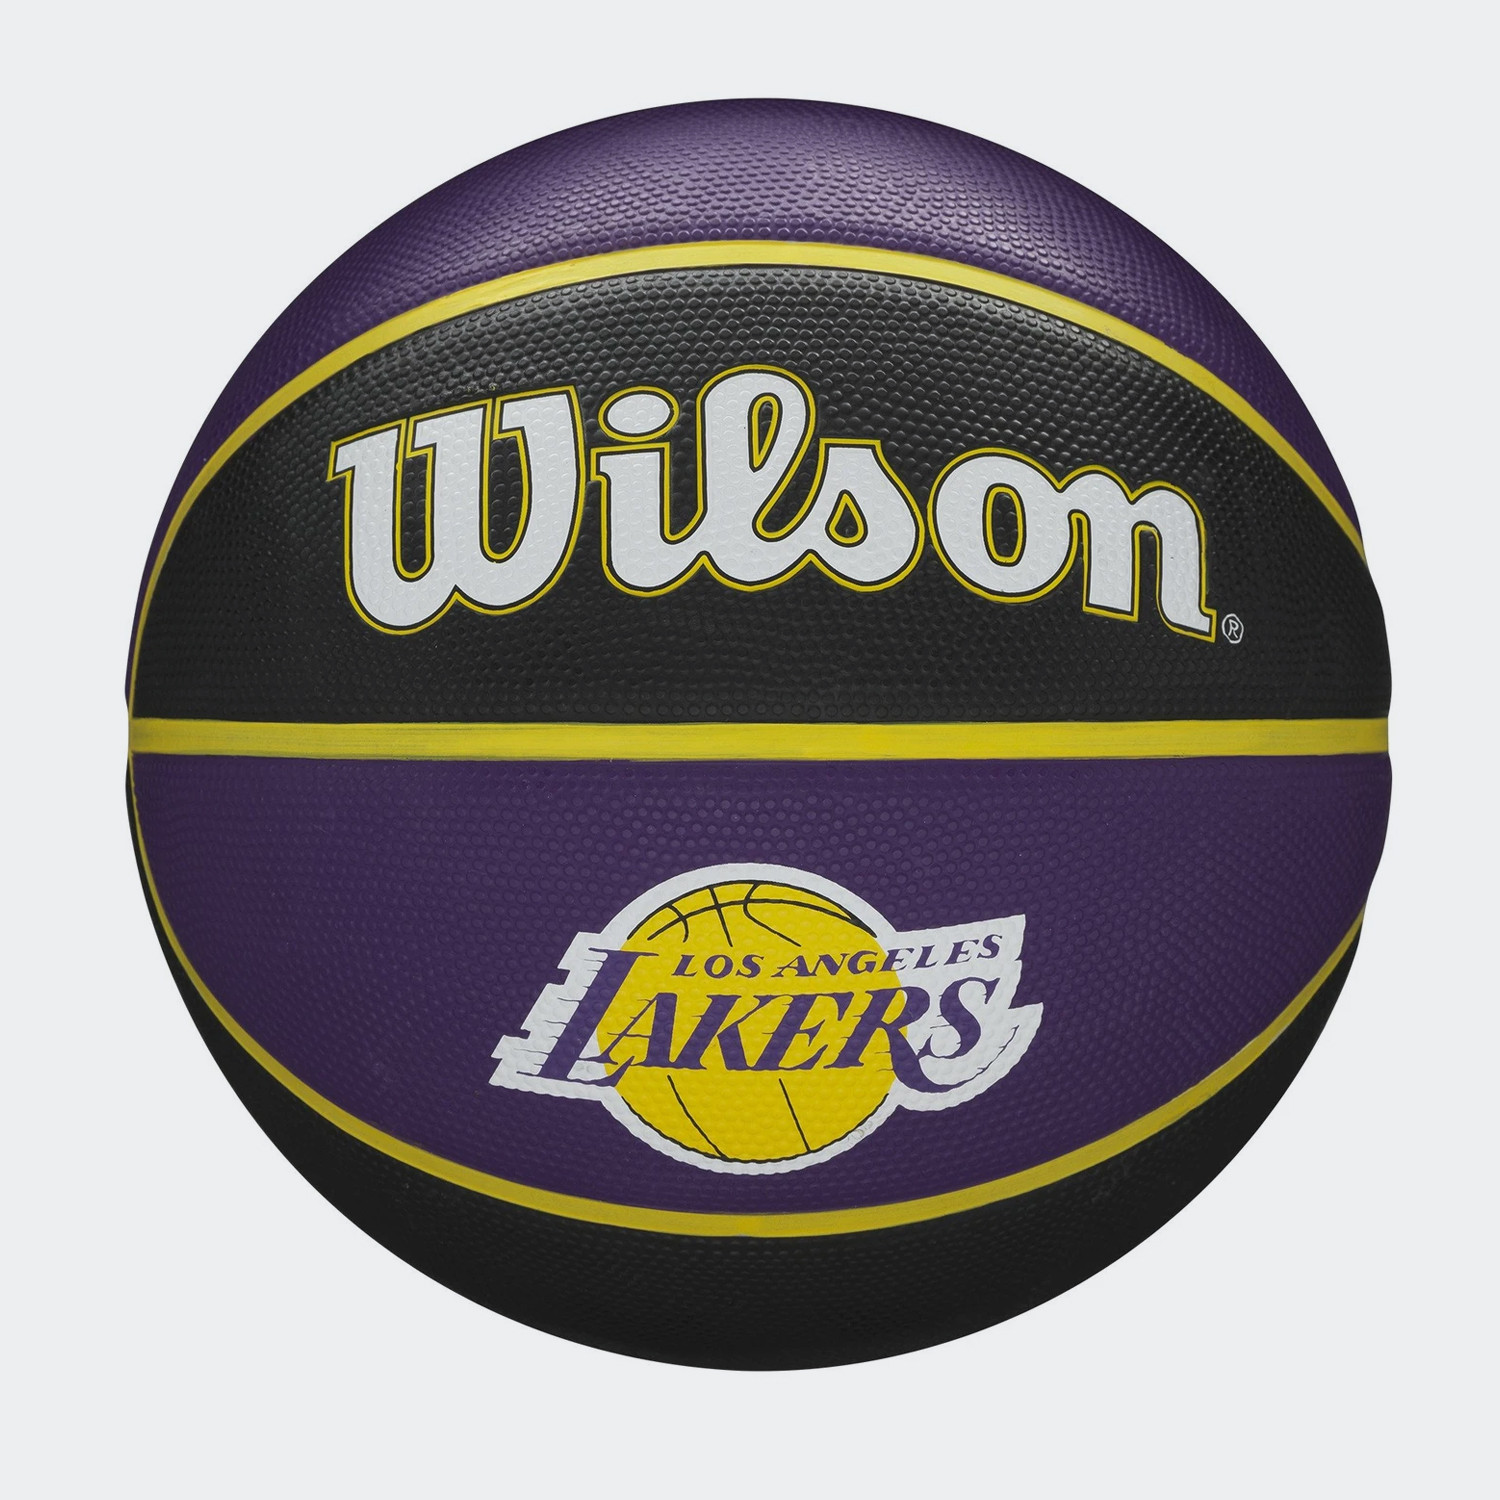 Wilson NBA Los Angeles Lakers Team Tribute Μπάλα Μπάκσκετ No7 (9000098922_1608)